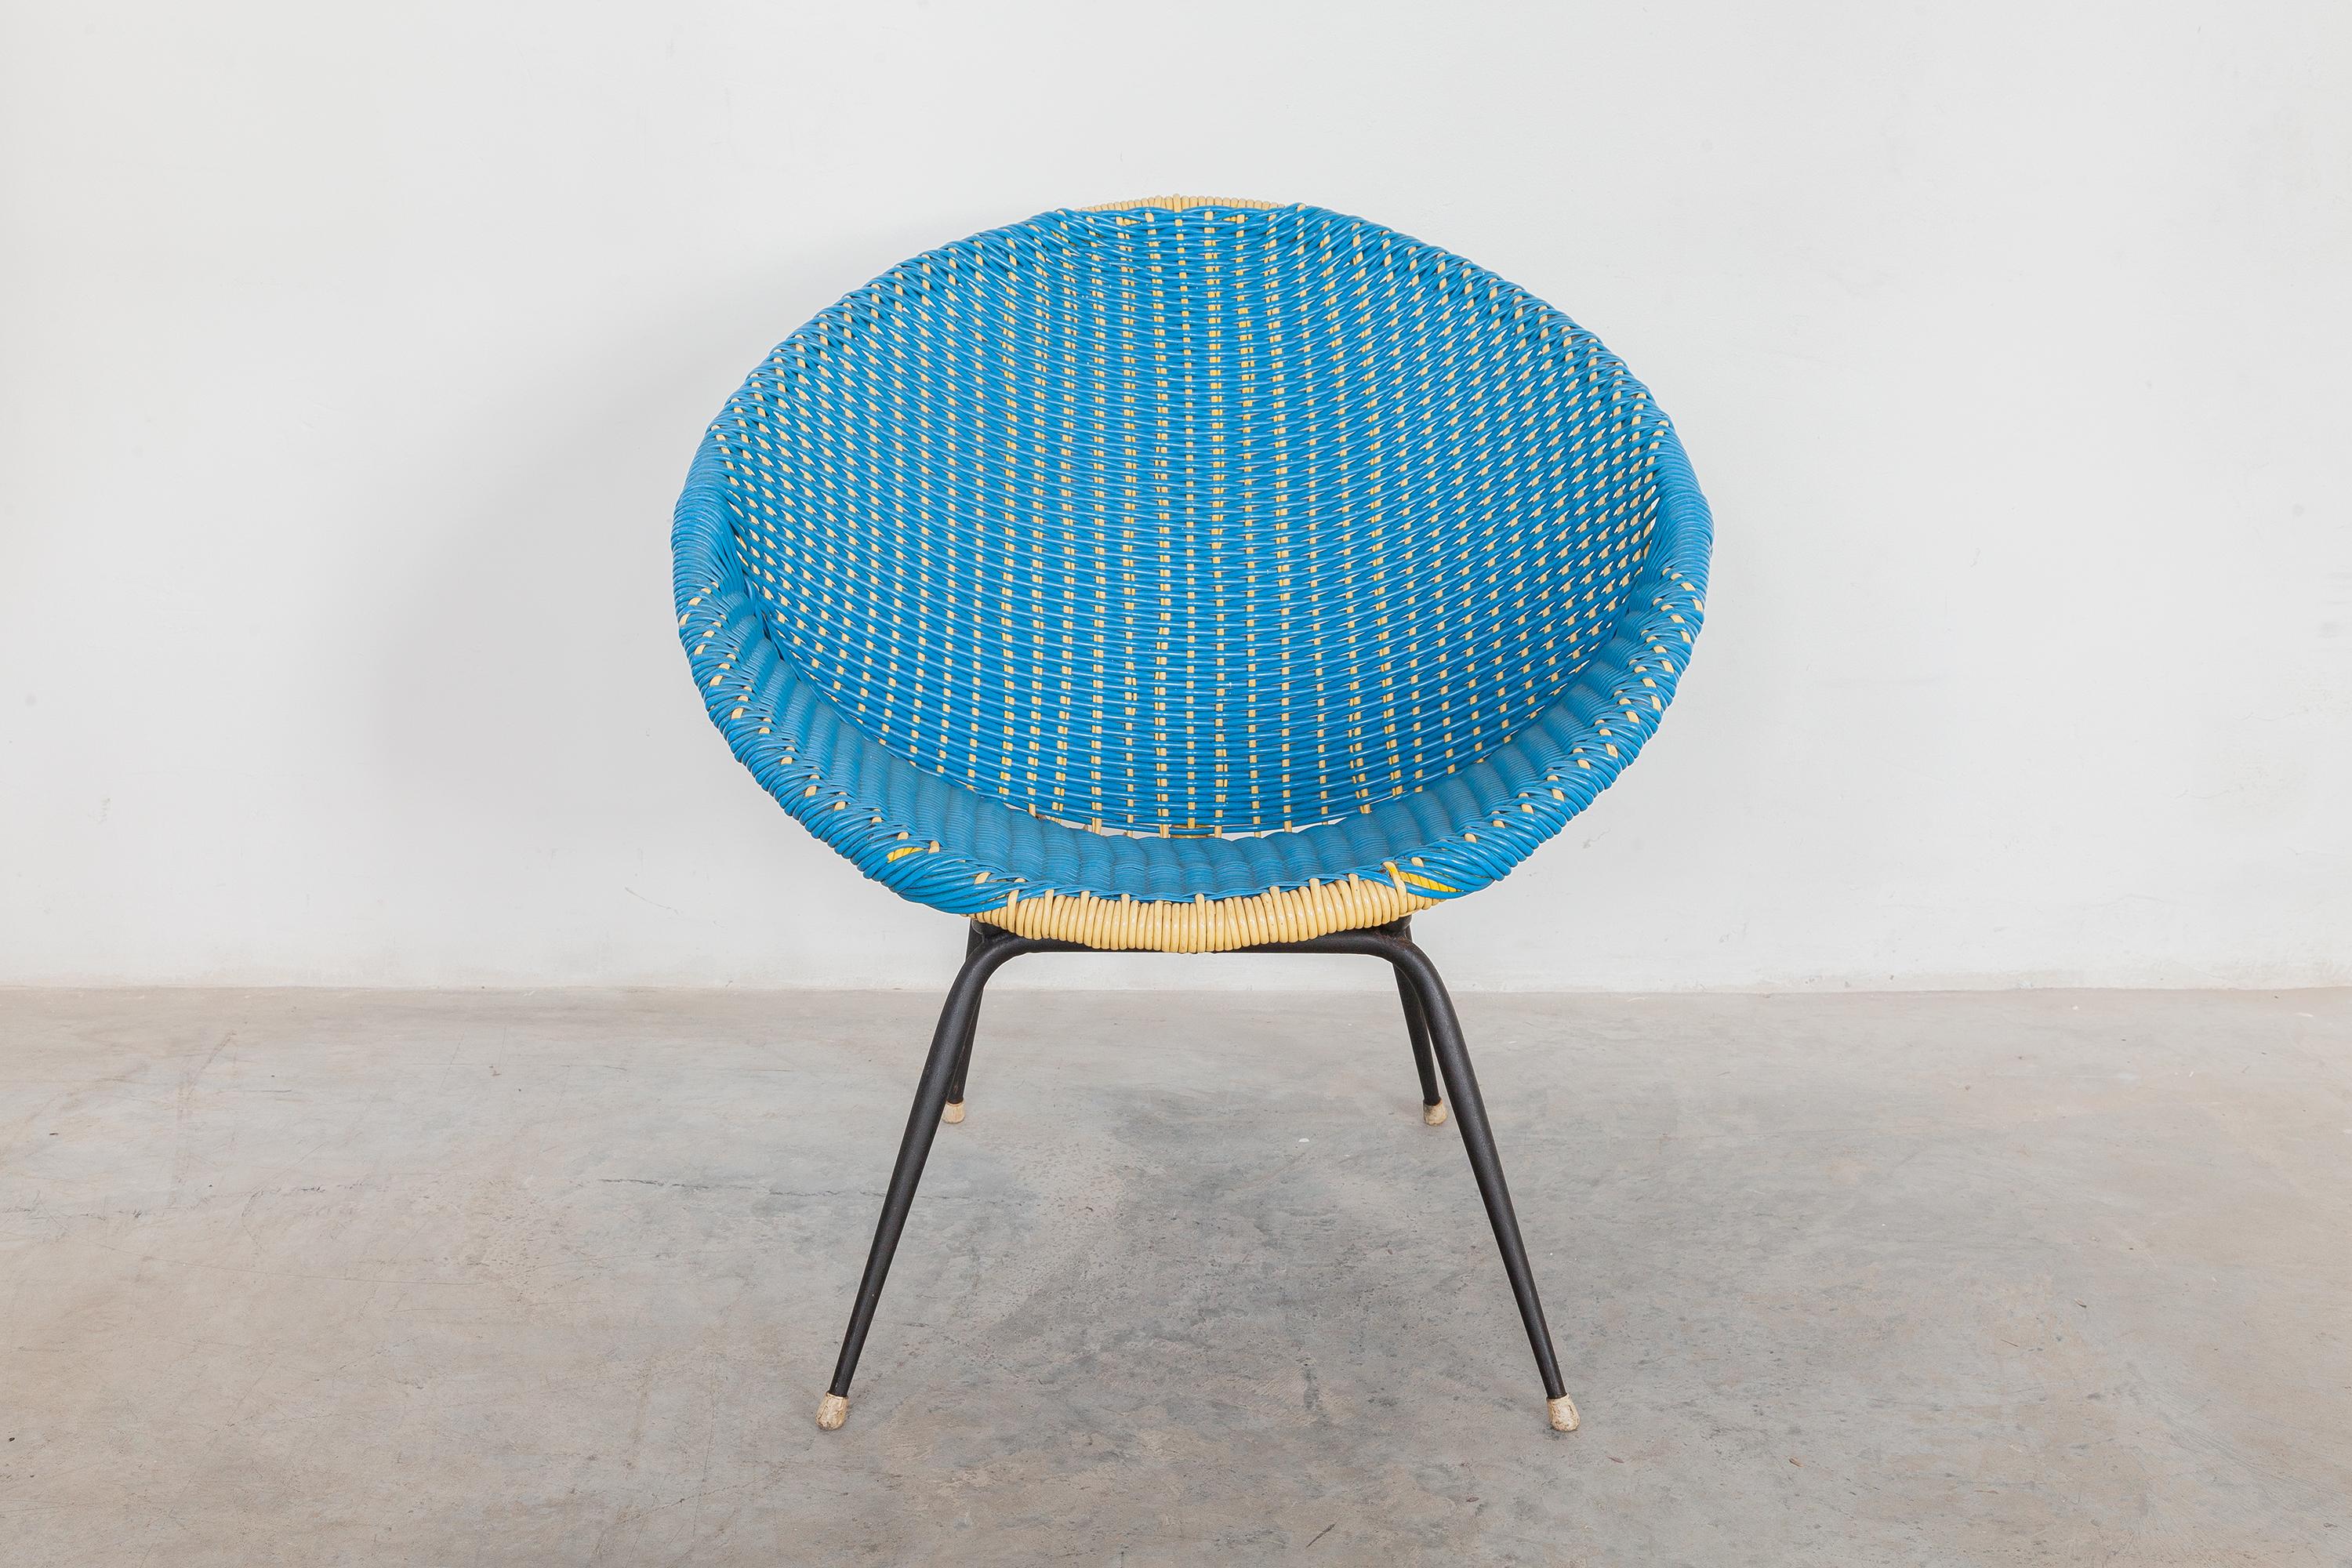 Set of midcentury woven bucket chairs. Tubular metal legs with rubber caps. The seat is woven in sturdy plastic cord. One blue and yellow weave and one black and yellow. In very good original condition.
Dimensions: 73 W x 75 H x 73 D cm, seat 40 cm